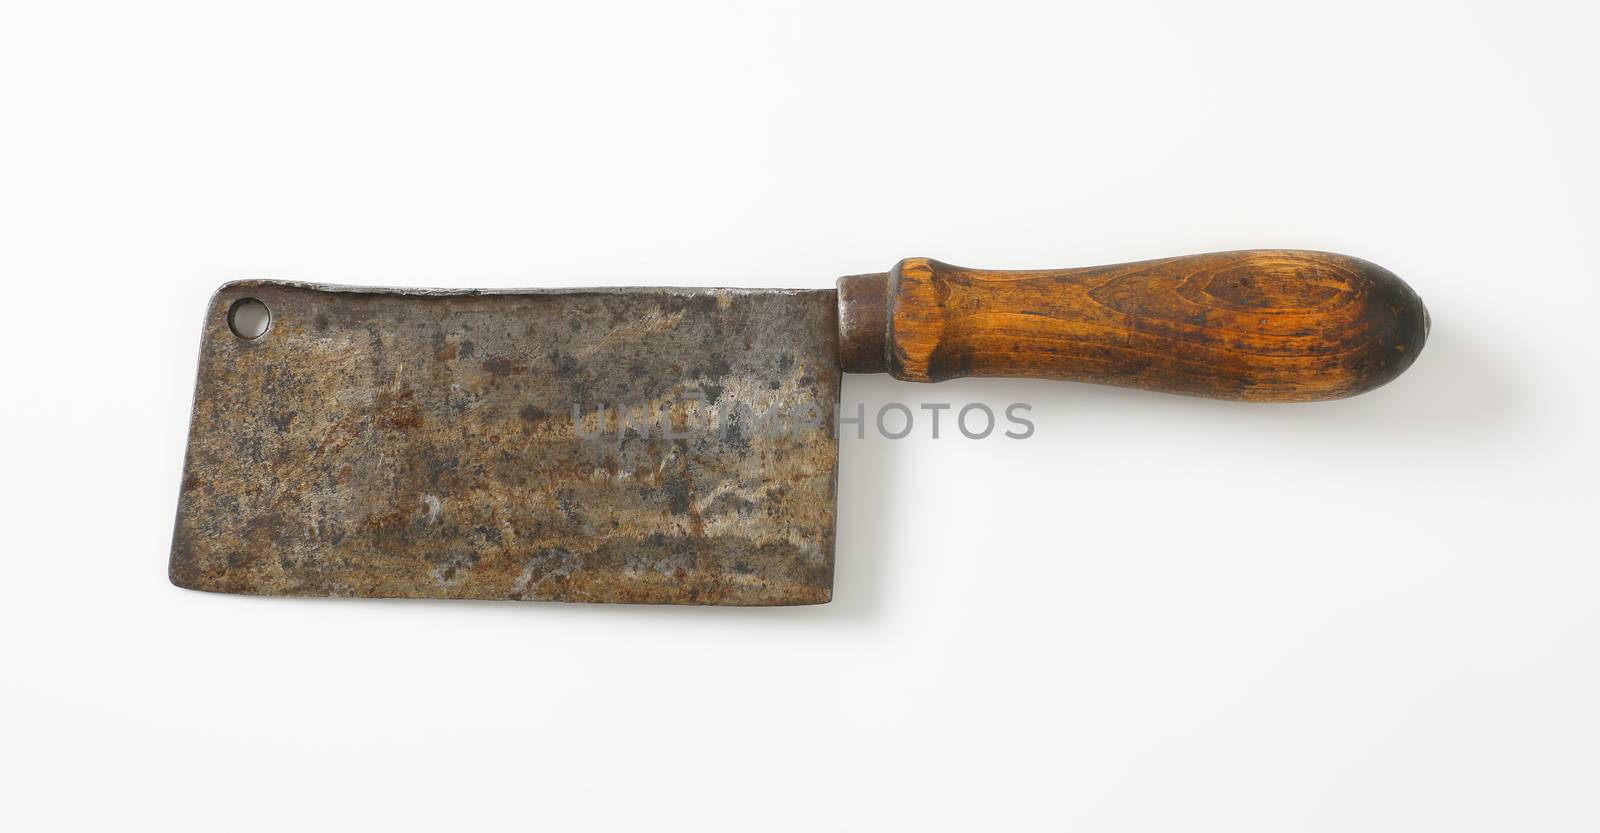 Old rusty chopping knife with wooden handle